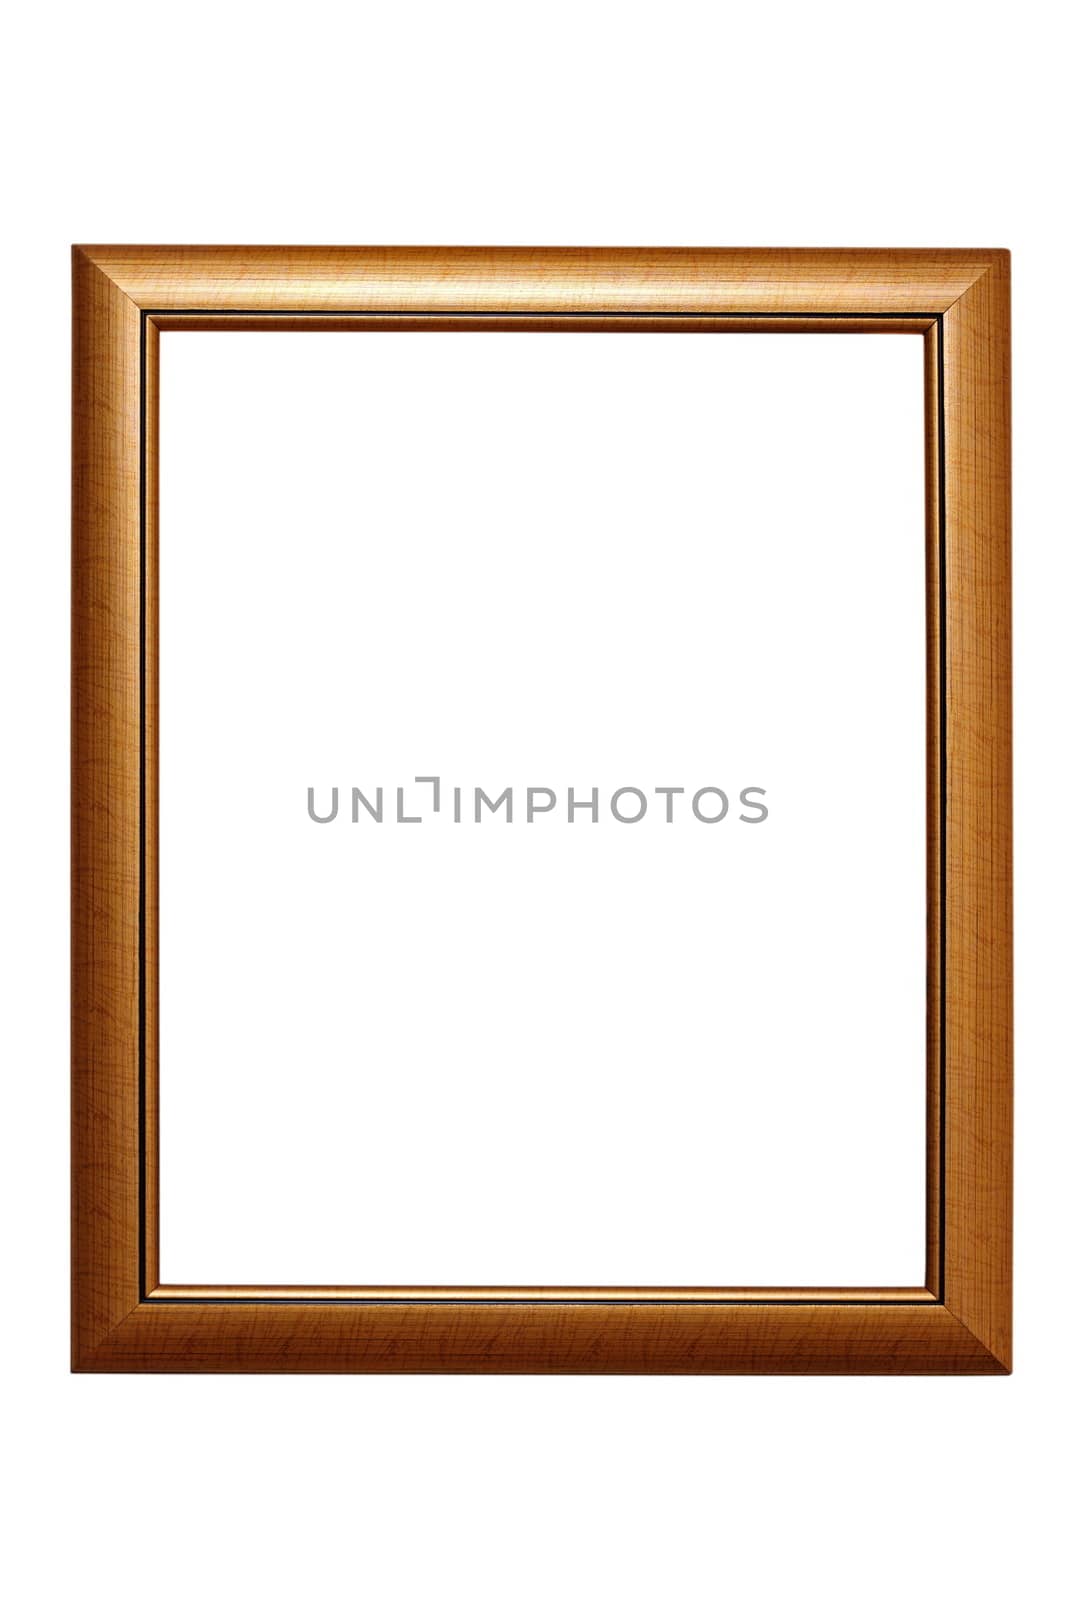 simple empty wooden frame isolated over white background for your design